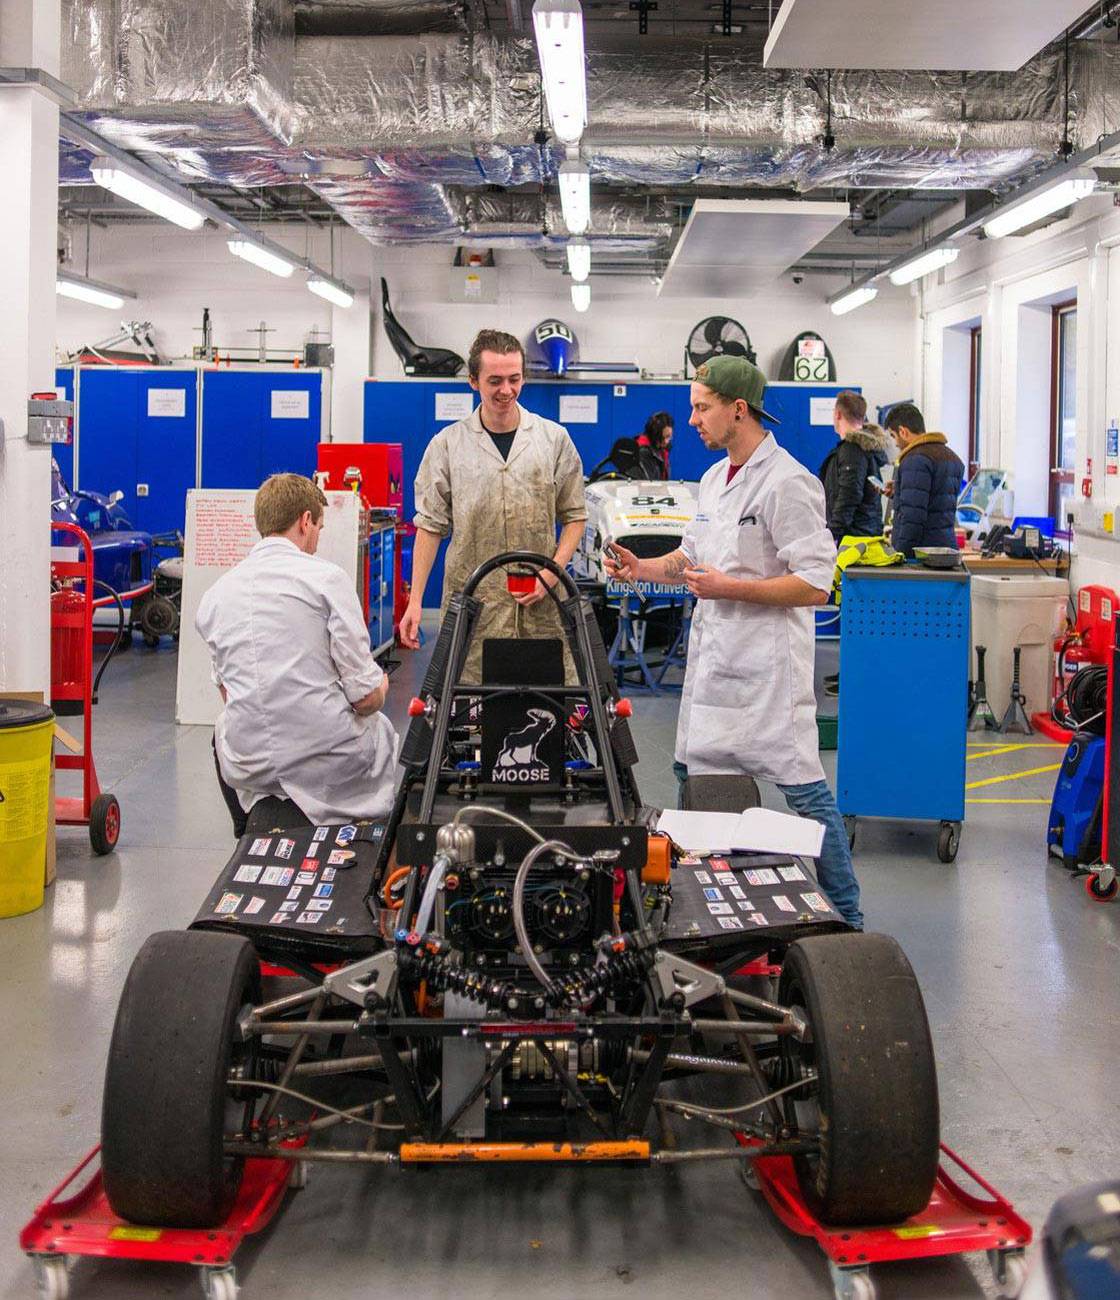 Three engineering students working on a Formula Student car.